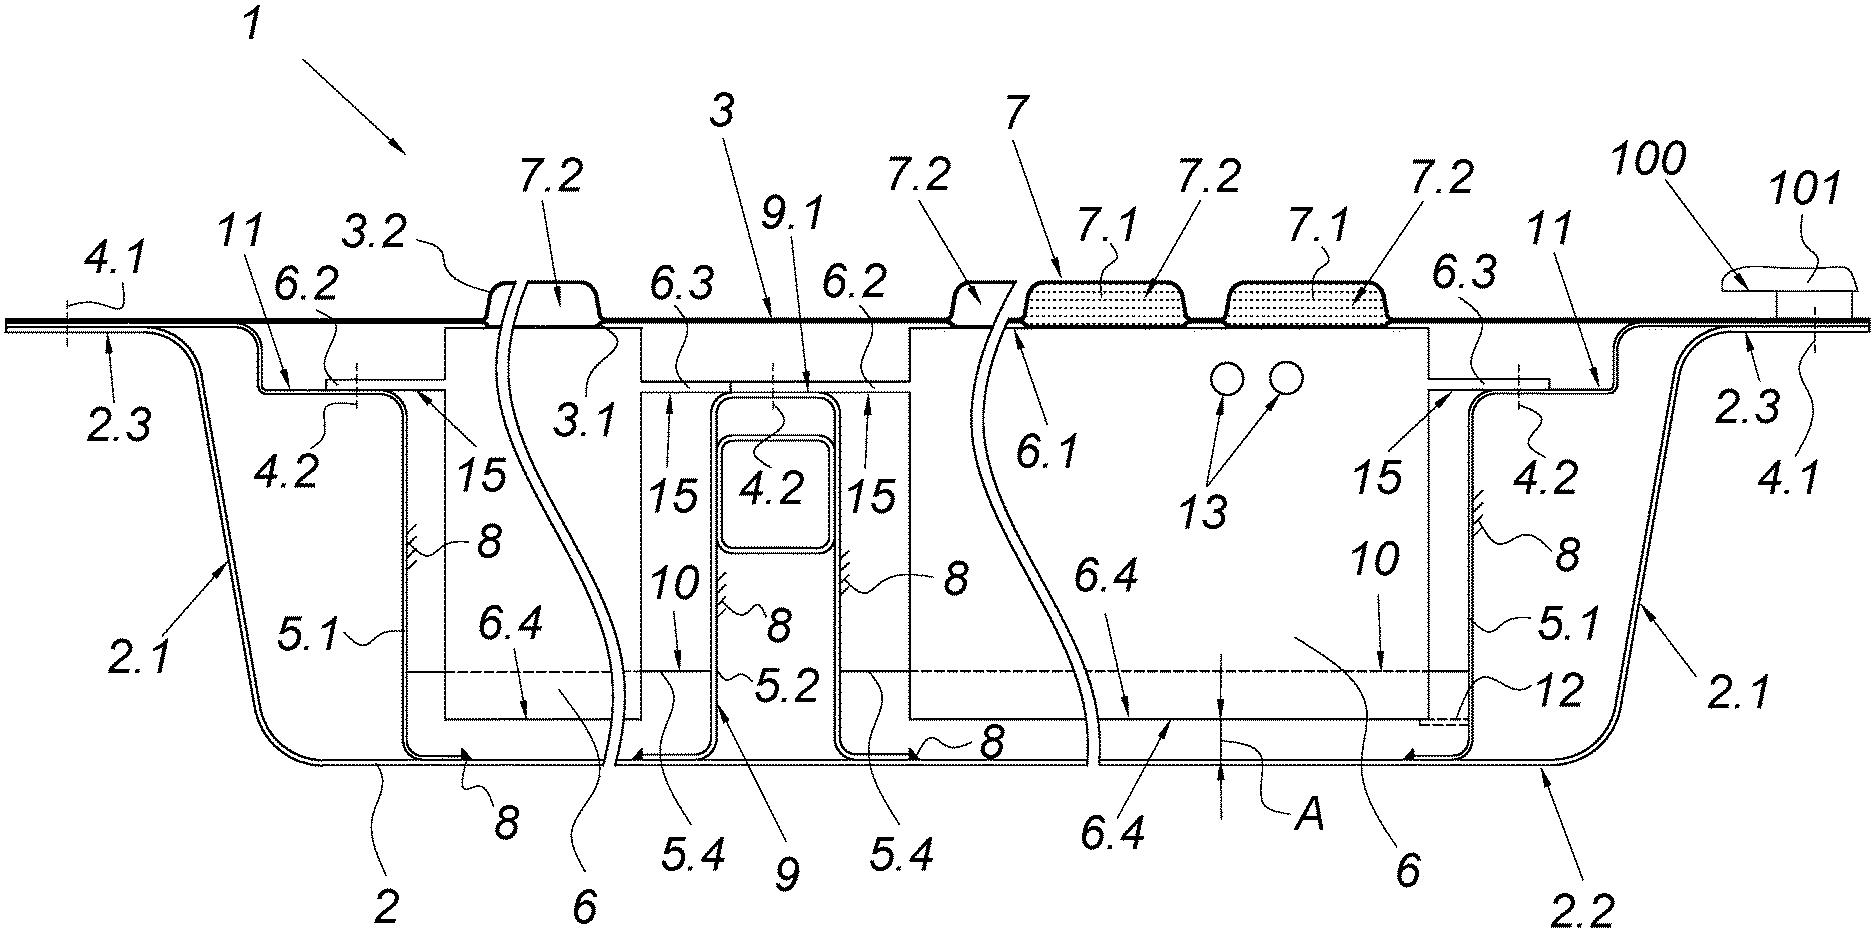 Voestalpine AG Patent: Battery Carrier with Heat Exchanger Lid - Mining Technology